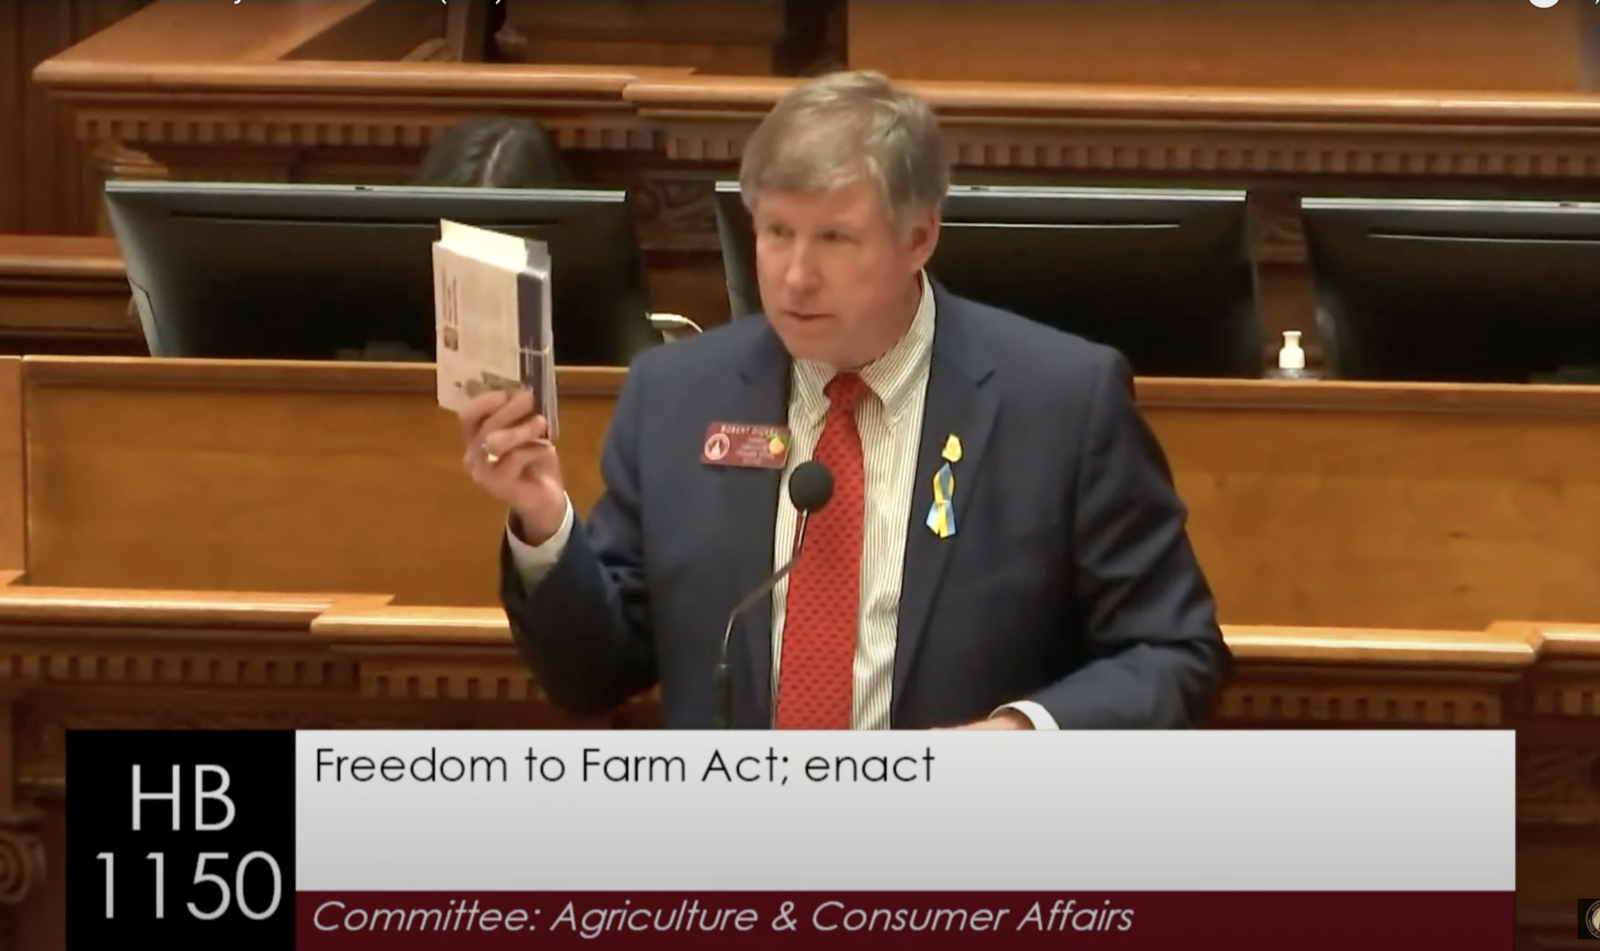 Chairman Robert Dickey presents House Bill 1150, the Freedom to Farm Act, to the House on Thursday. Chairman Dickey showed the support of GFB County Presidents who hand-wrote postcards